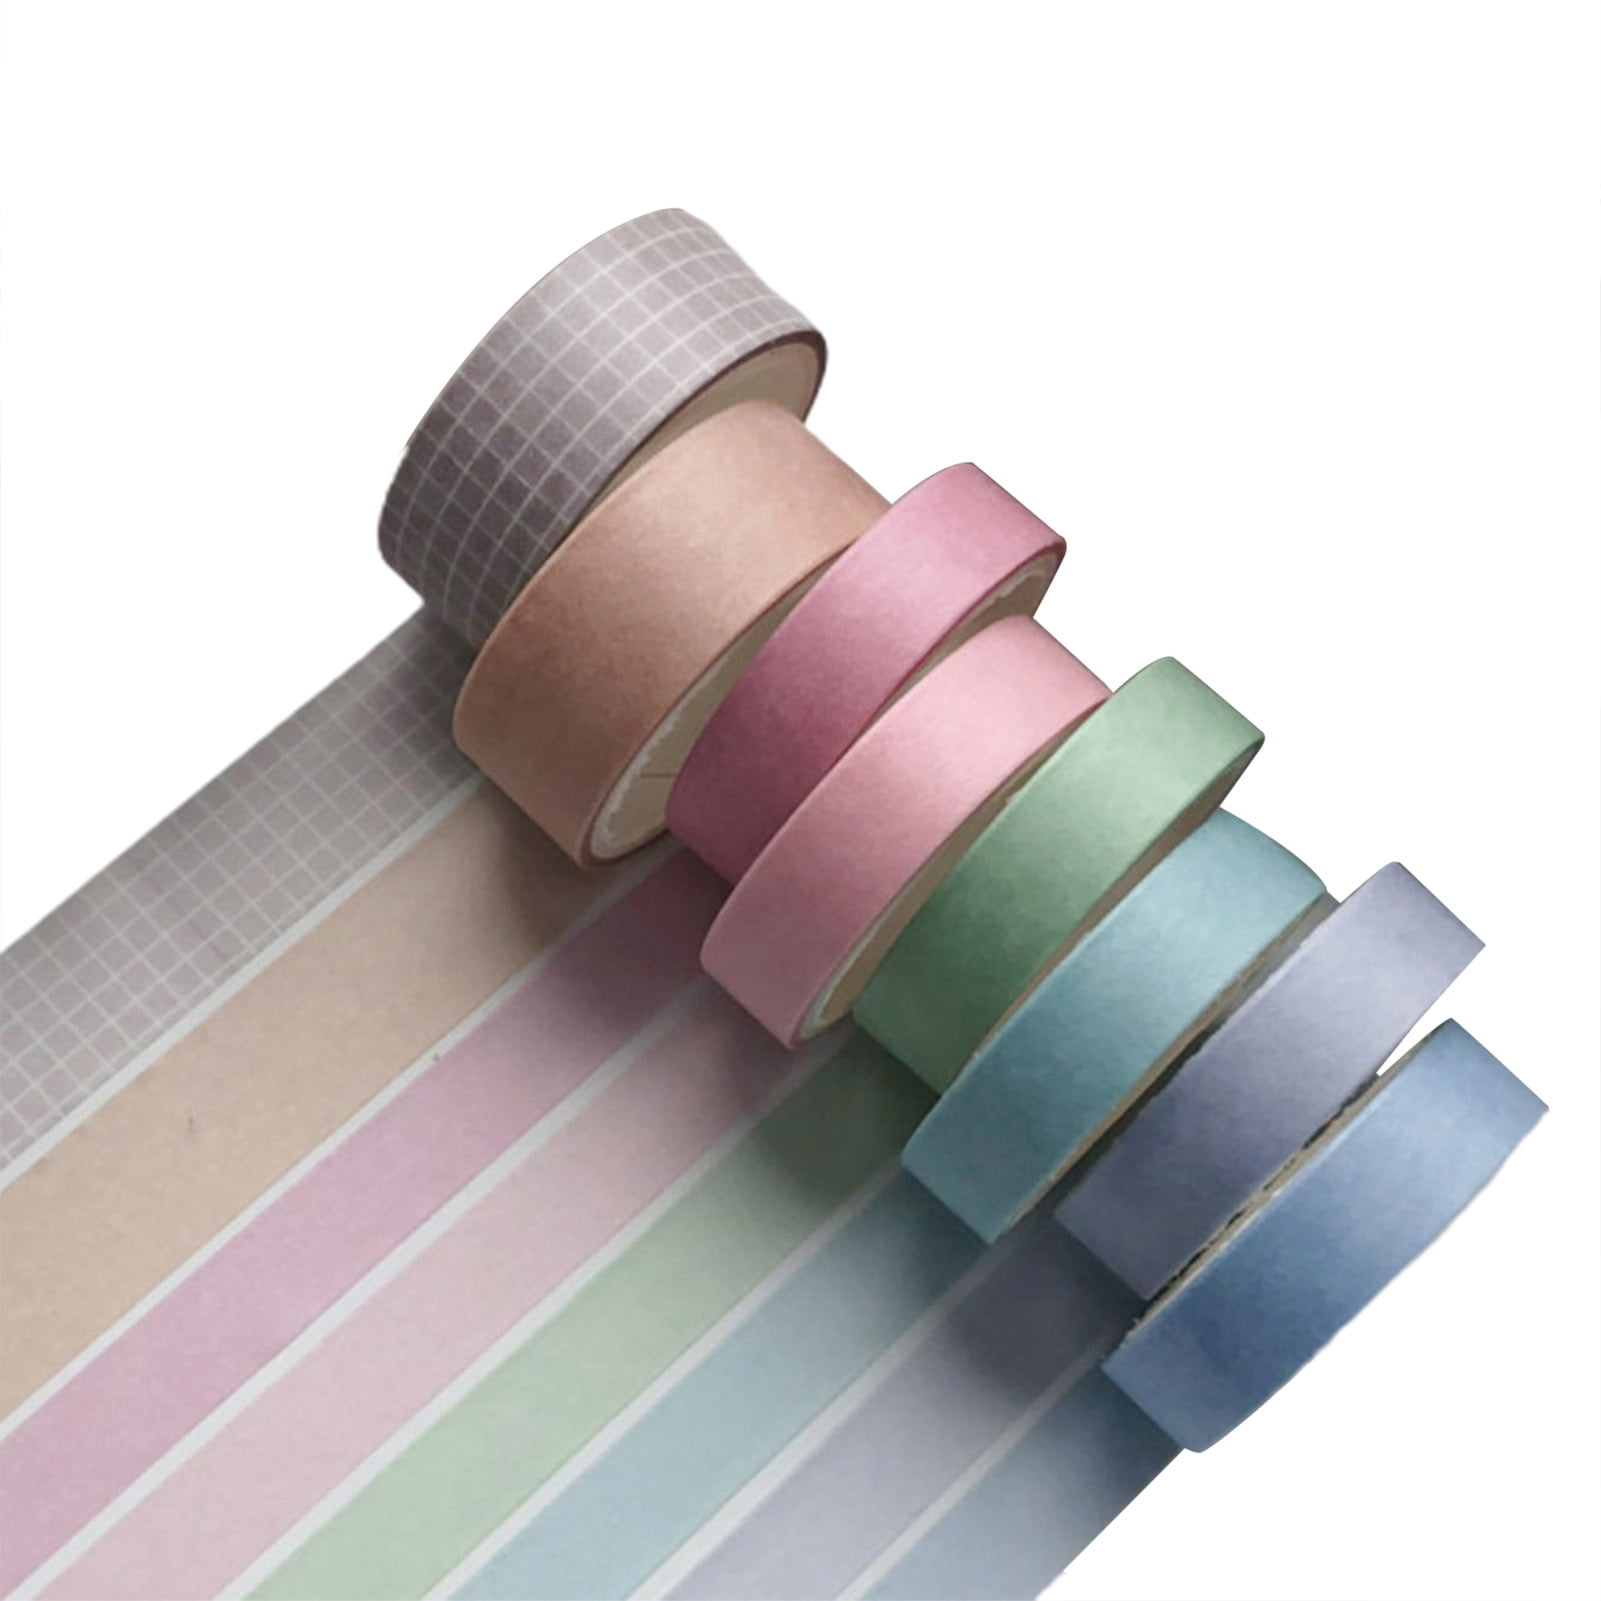 STOBOK 12 Rolls Color Pocket Tape Metal Tape Colored Packing Tape Gradient  Masking Tape Colored Craft Tape Gradient Washi Tape Fluorescent Tape Gift